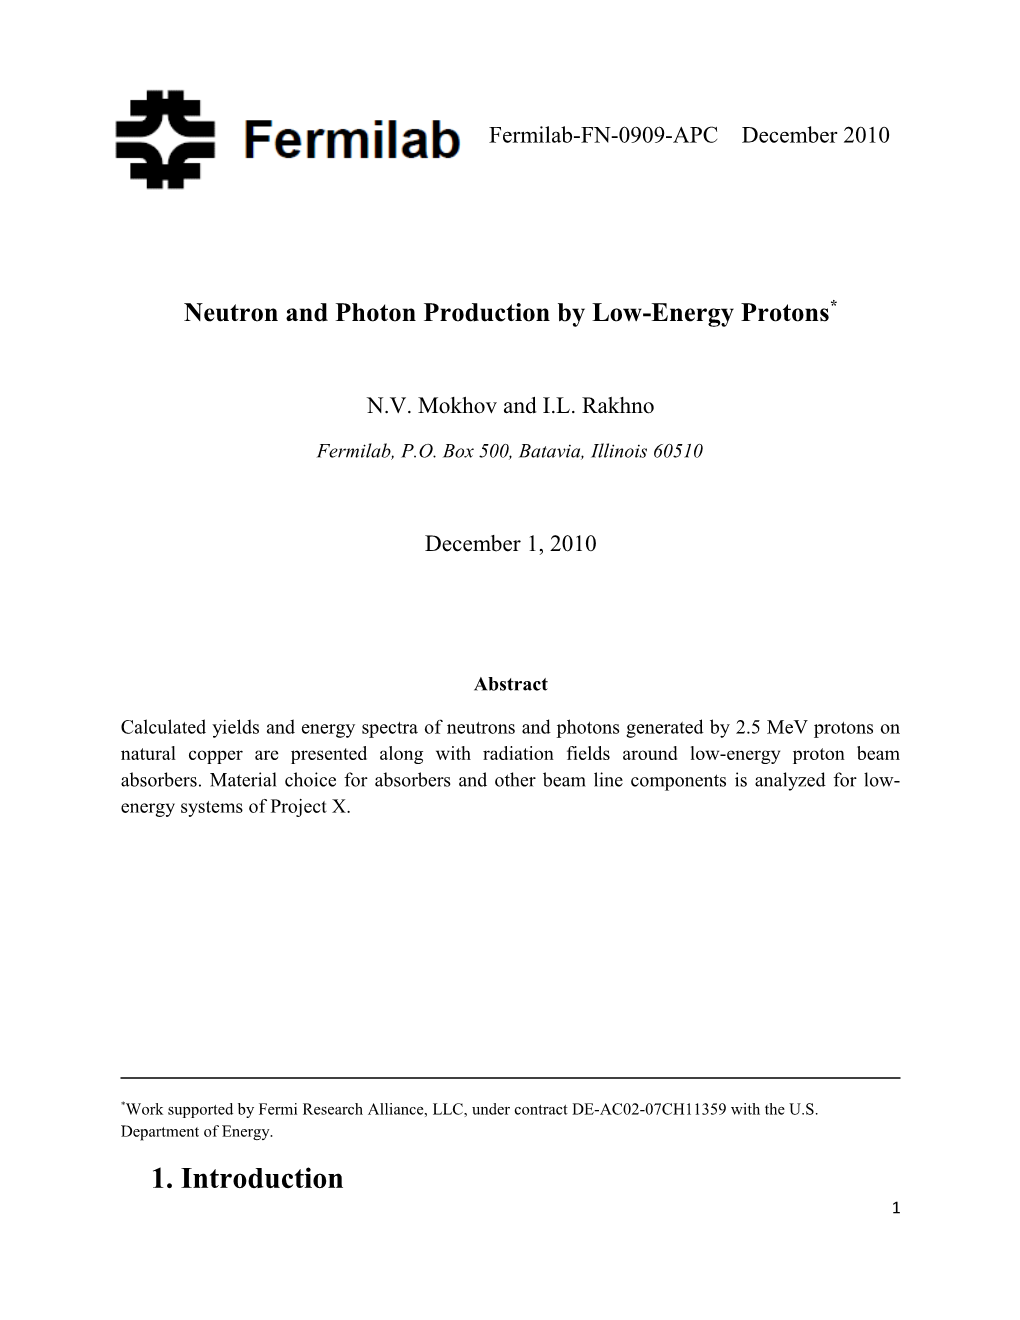 Neutron and Photon Production by Low-Energy Protons*